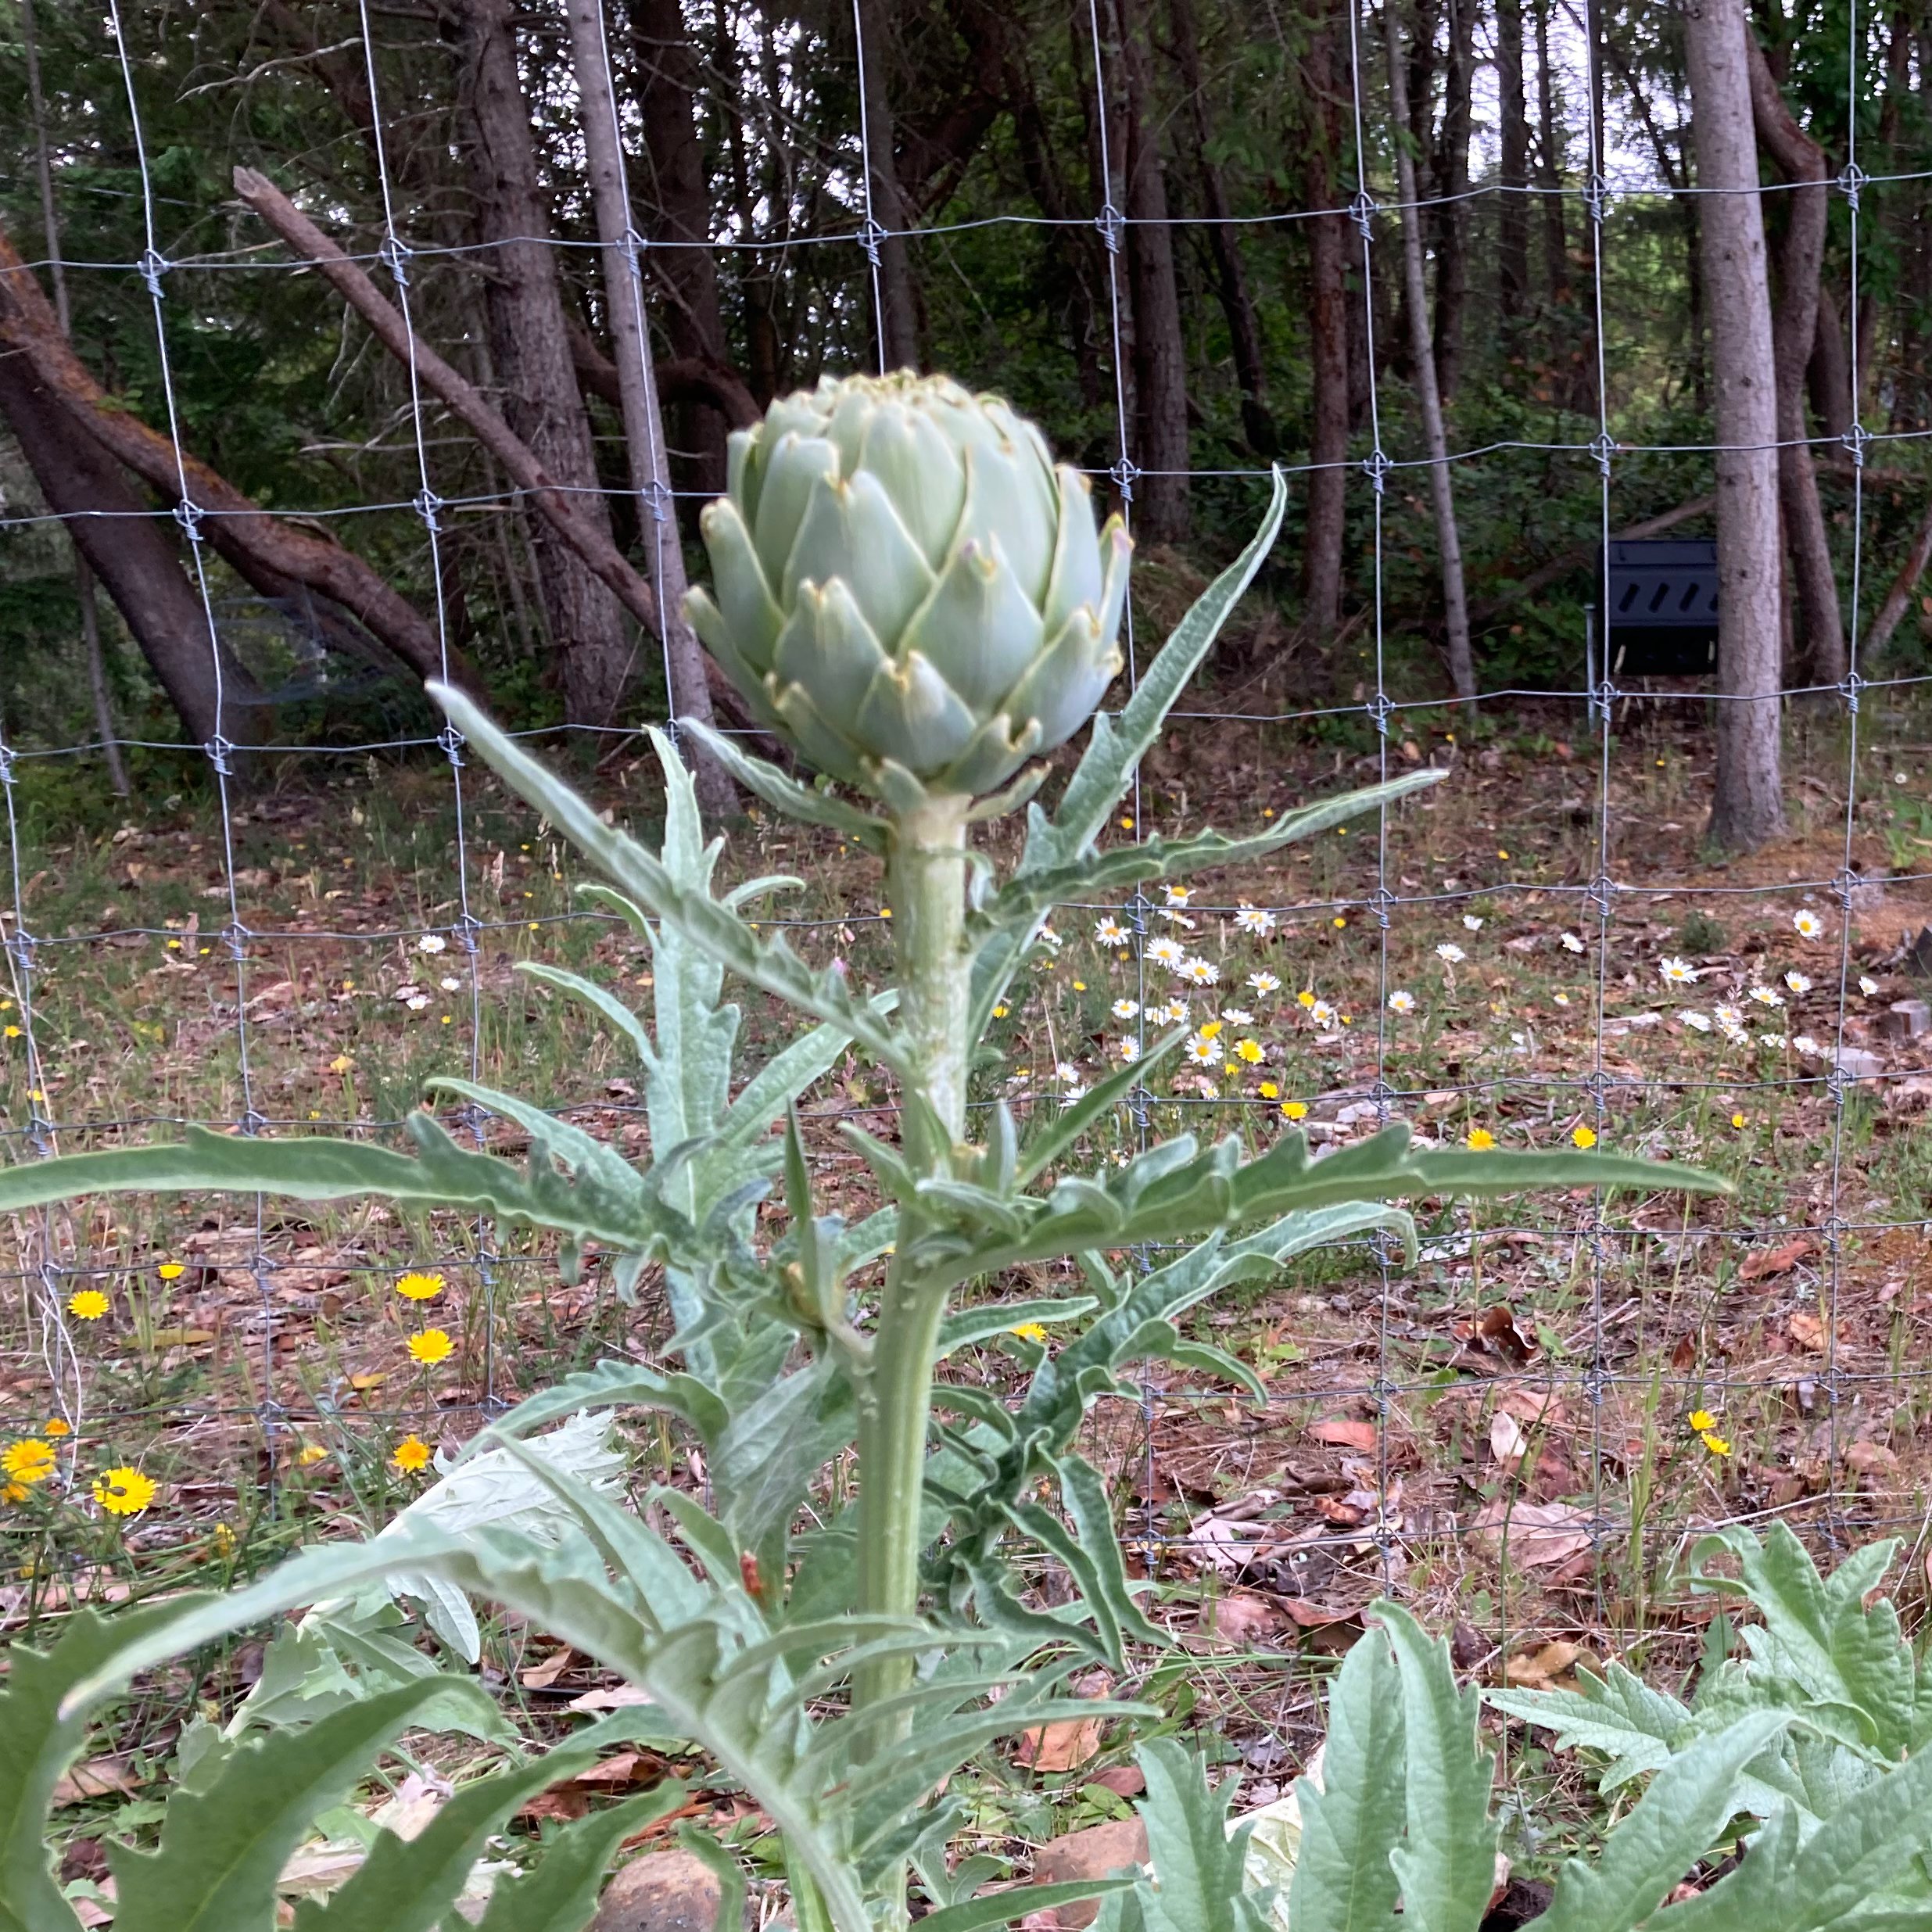  The artichokes are actually forming!  